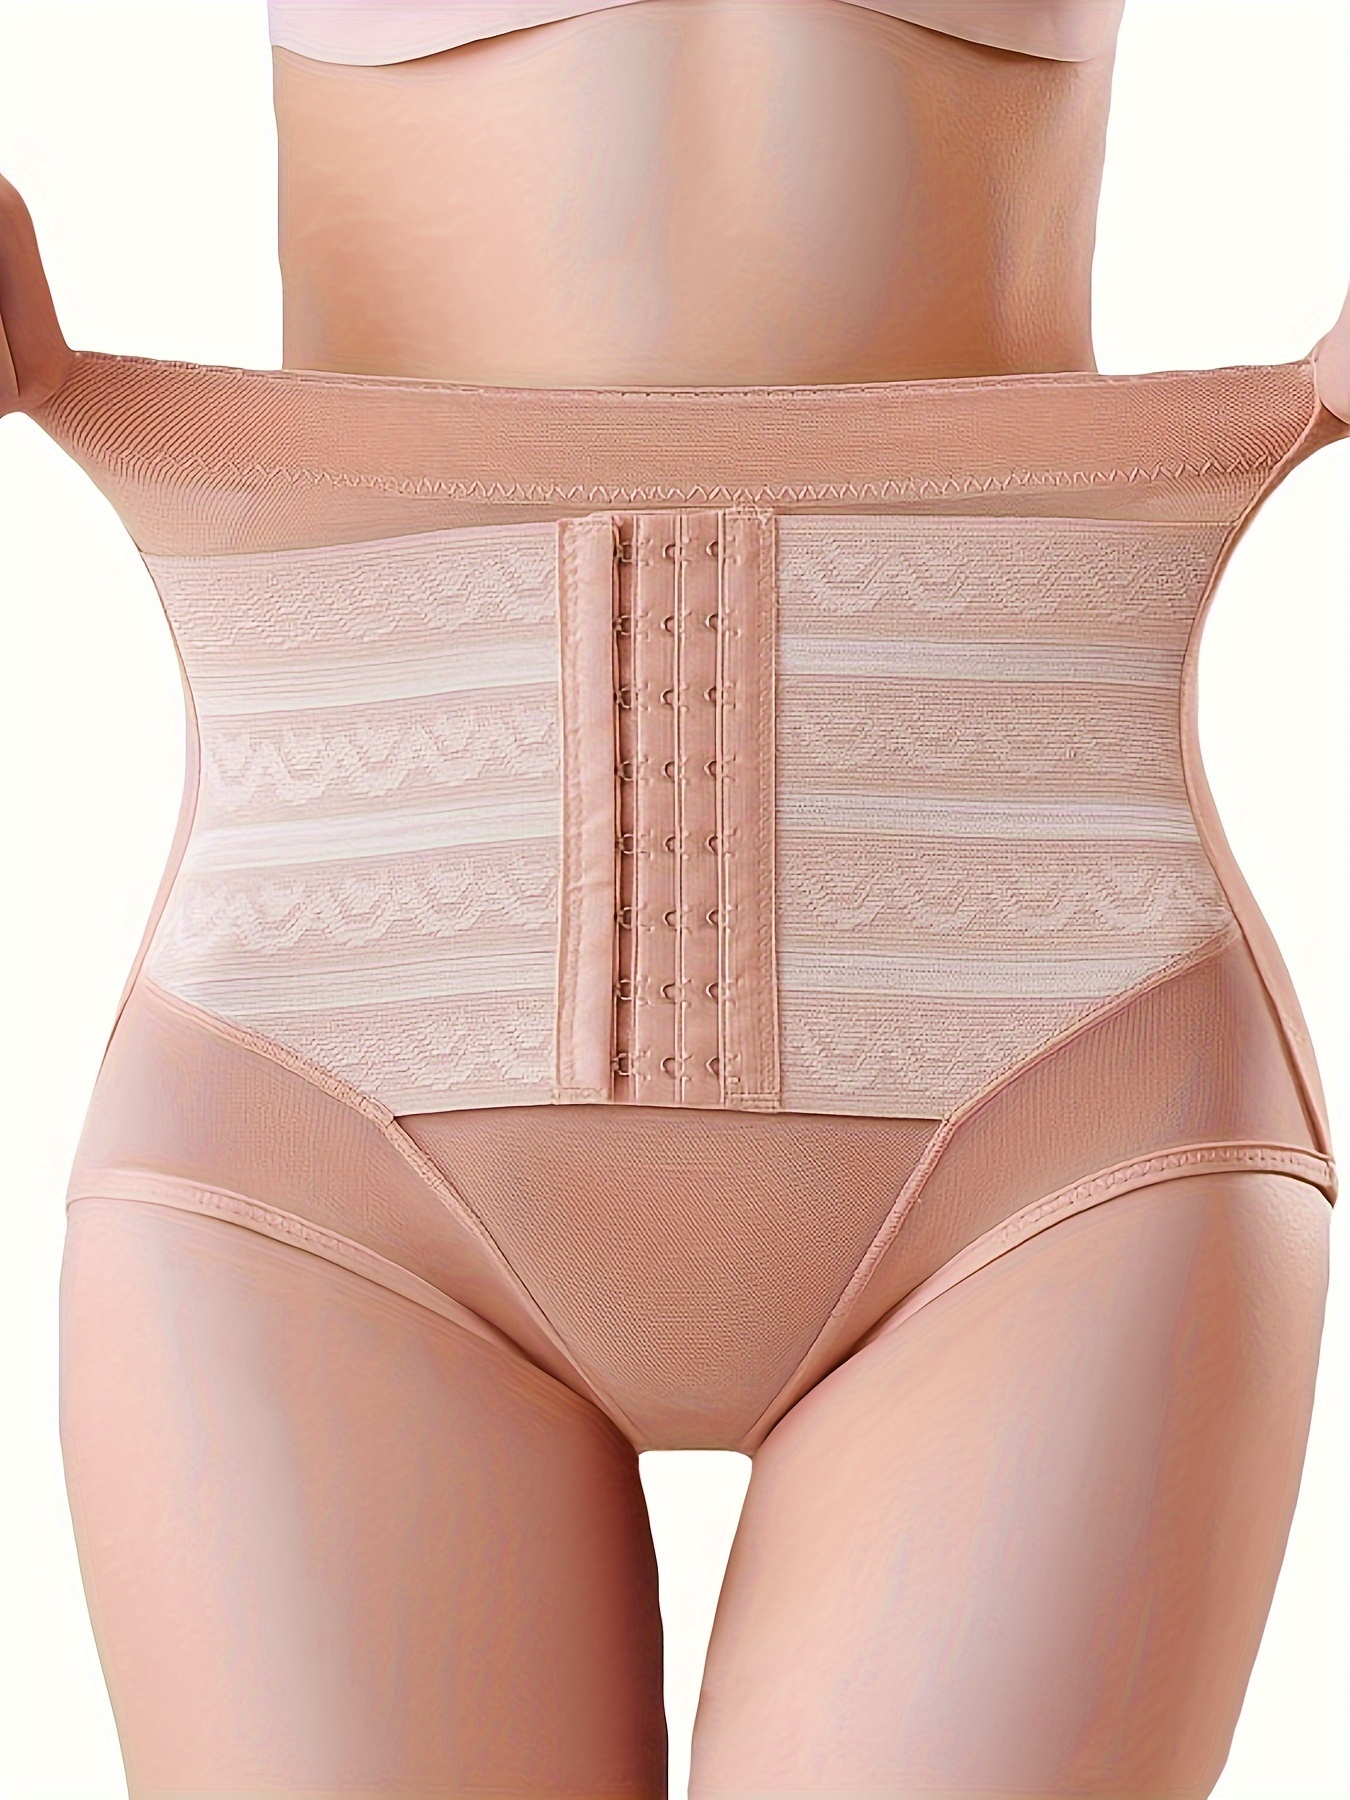 When Can I Wear A Corset After A C-Section?